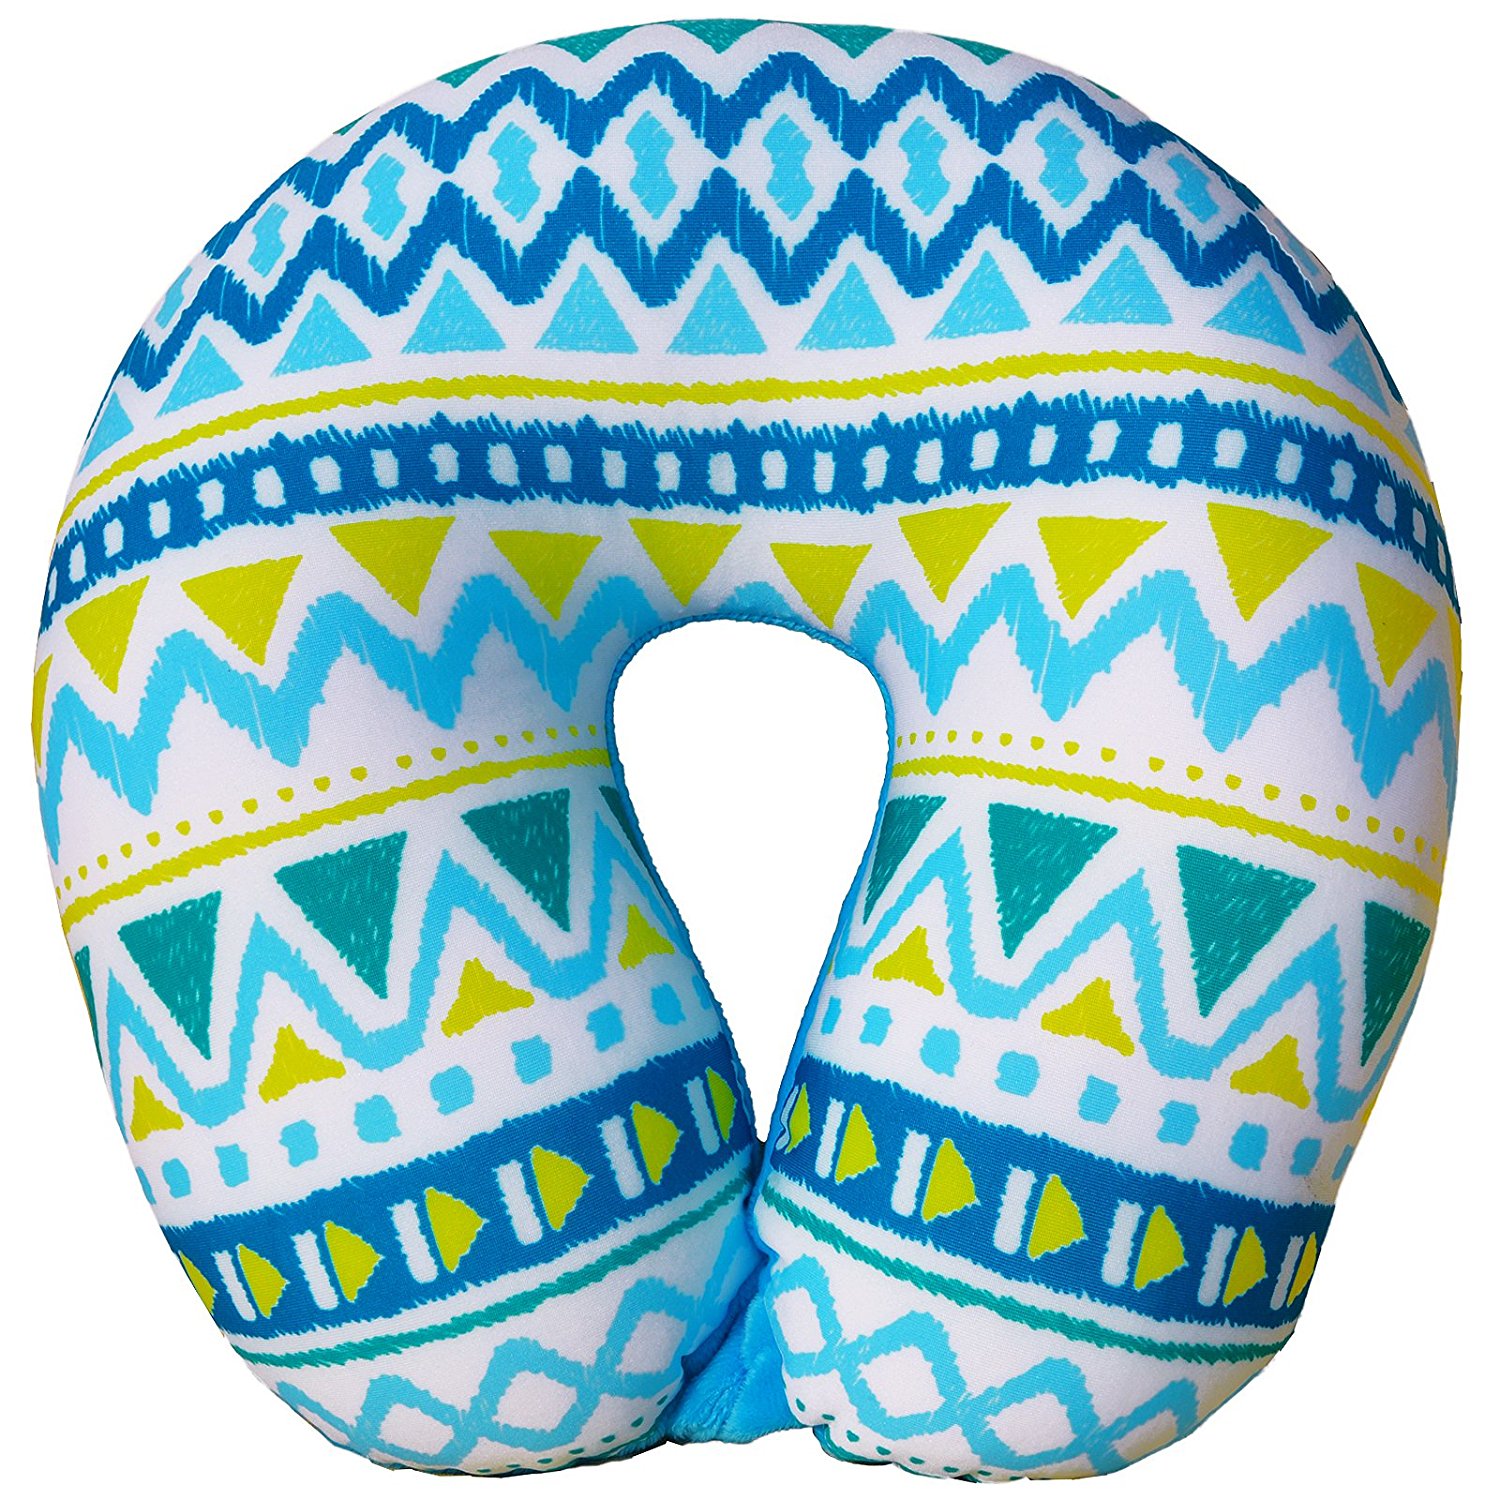 Bookishbunny Ultralight Micro Beads U Shaped Neck Pillow Travel Head Cervical Support Cushion - image 2 of 6